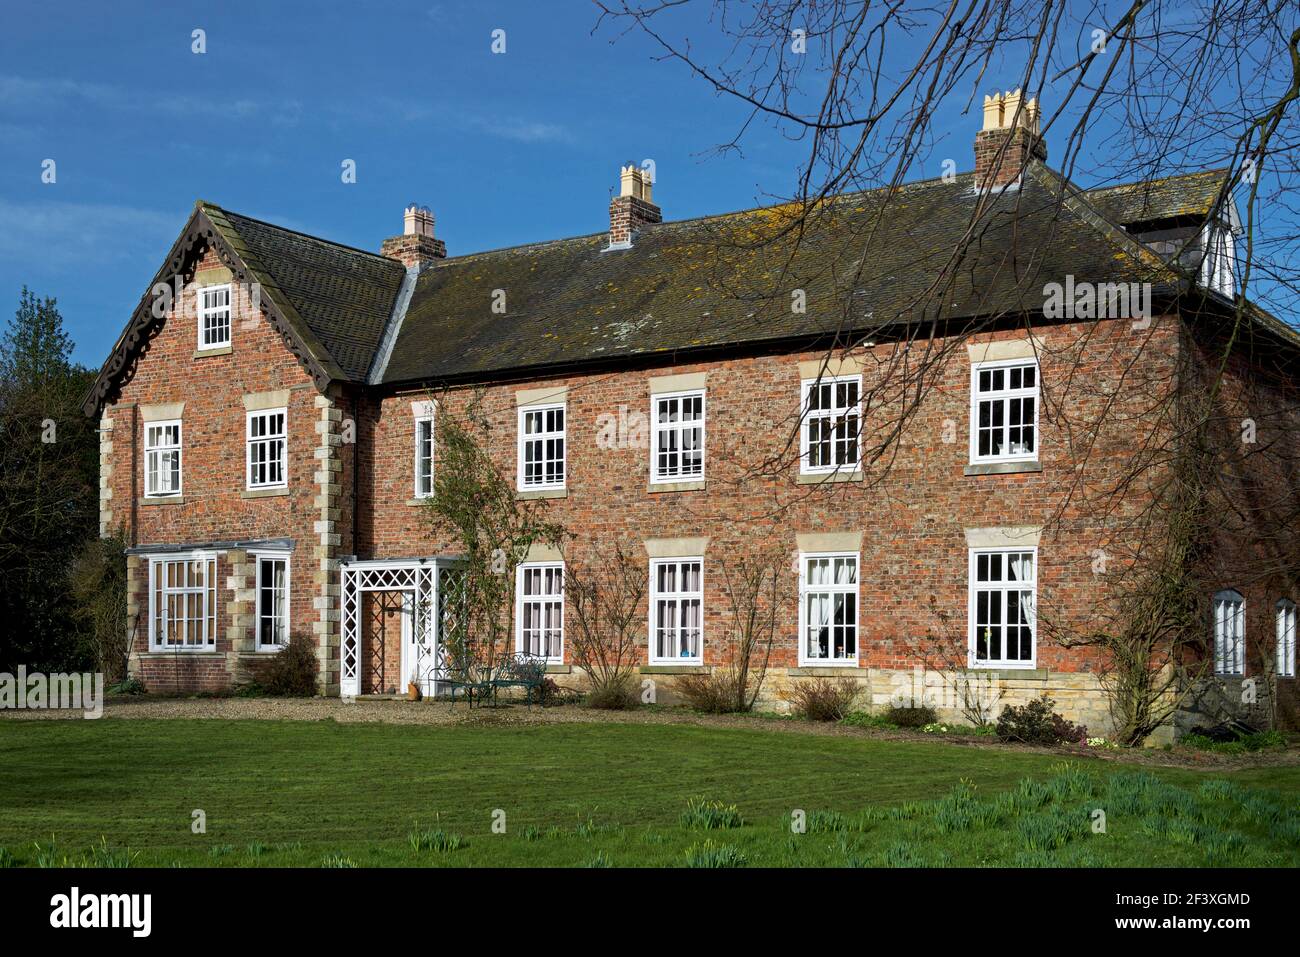 The Old Vicarage in the village of Healaugh, North Yorkshire, England UK Stock Photo